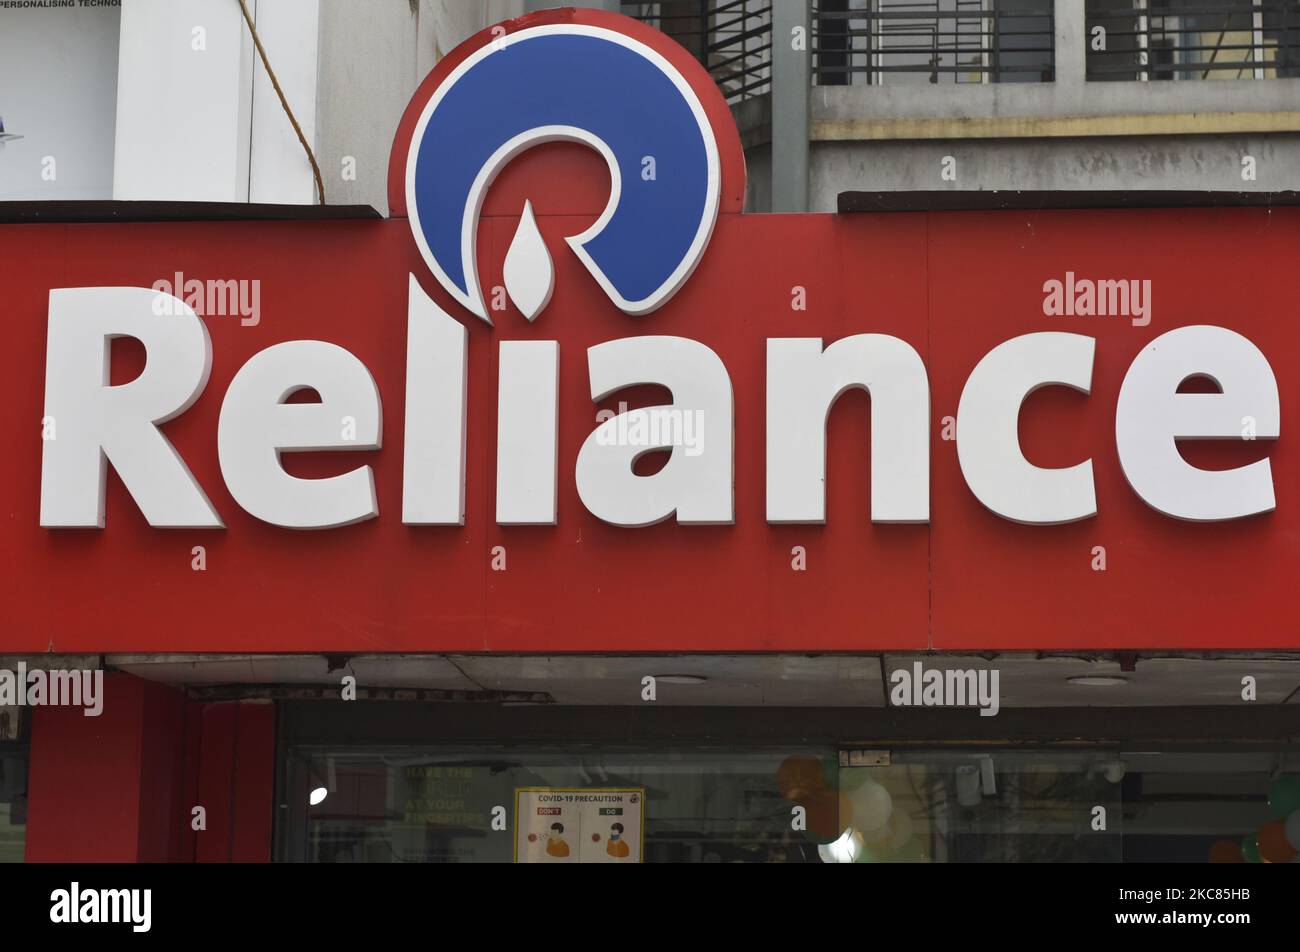 A Reliance logo can be seen in Kolkata, India, 25 January, 2021. Reliance Industries' profit jumped in the final quarter of 2020 as it reined in spending, although the Indian conglomerate recorded a sharp fall in revenue from its dominant oil-to-chemicals business according to an Indian media report. (Photo by Indranil Aditya/NurPhoto) Stock Photo